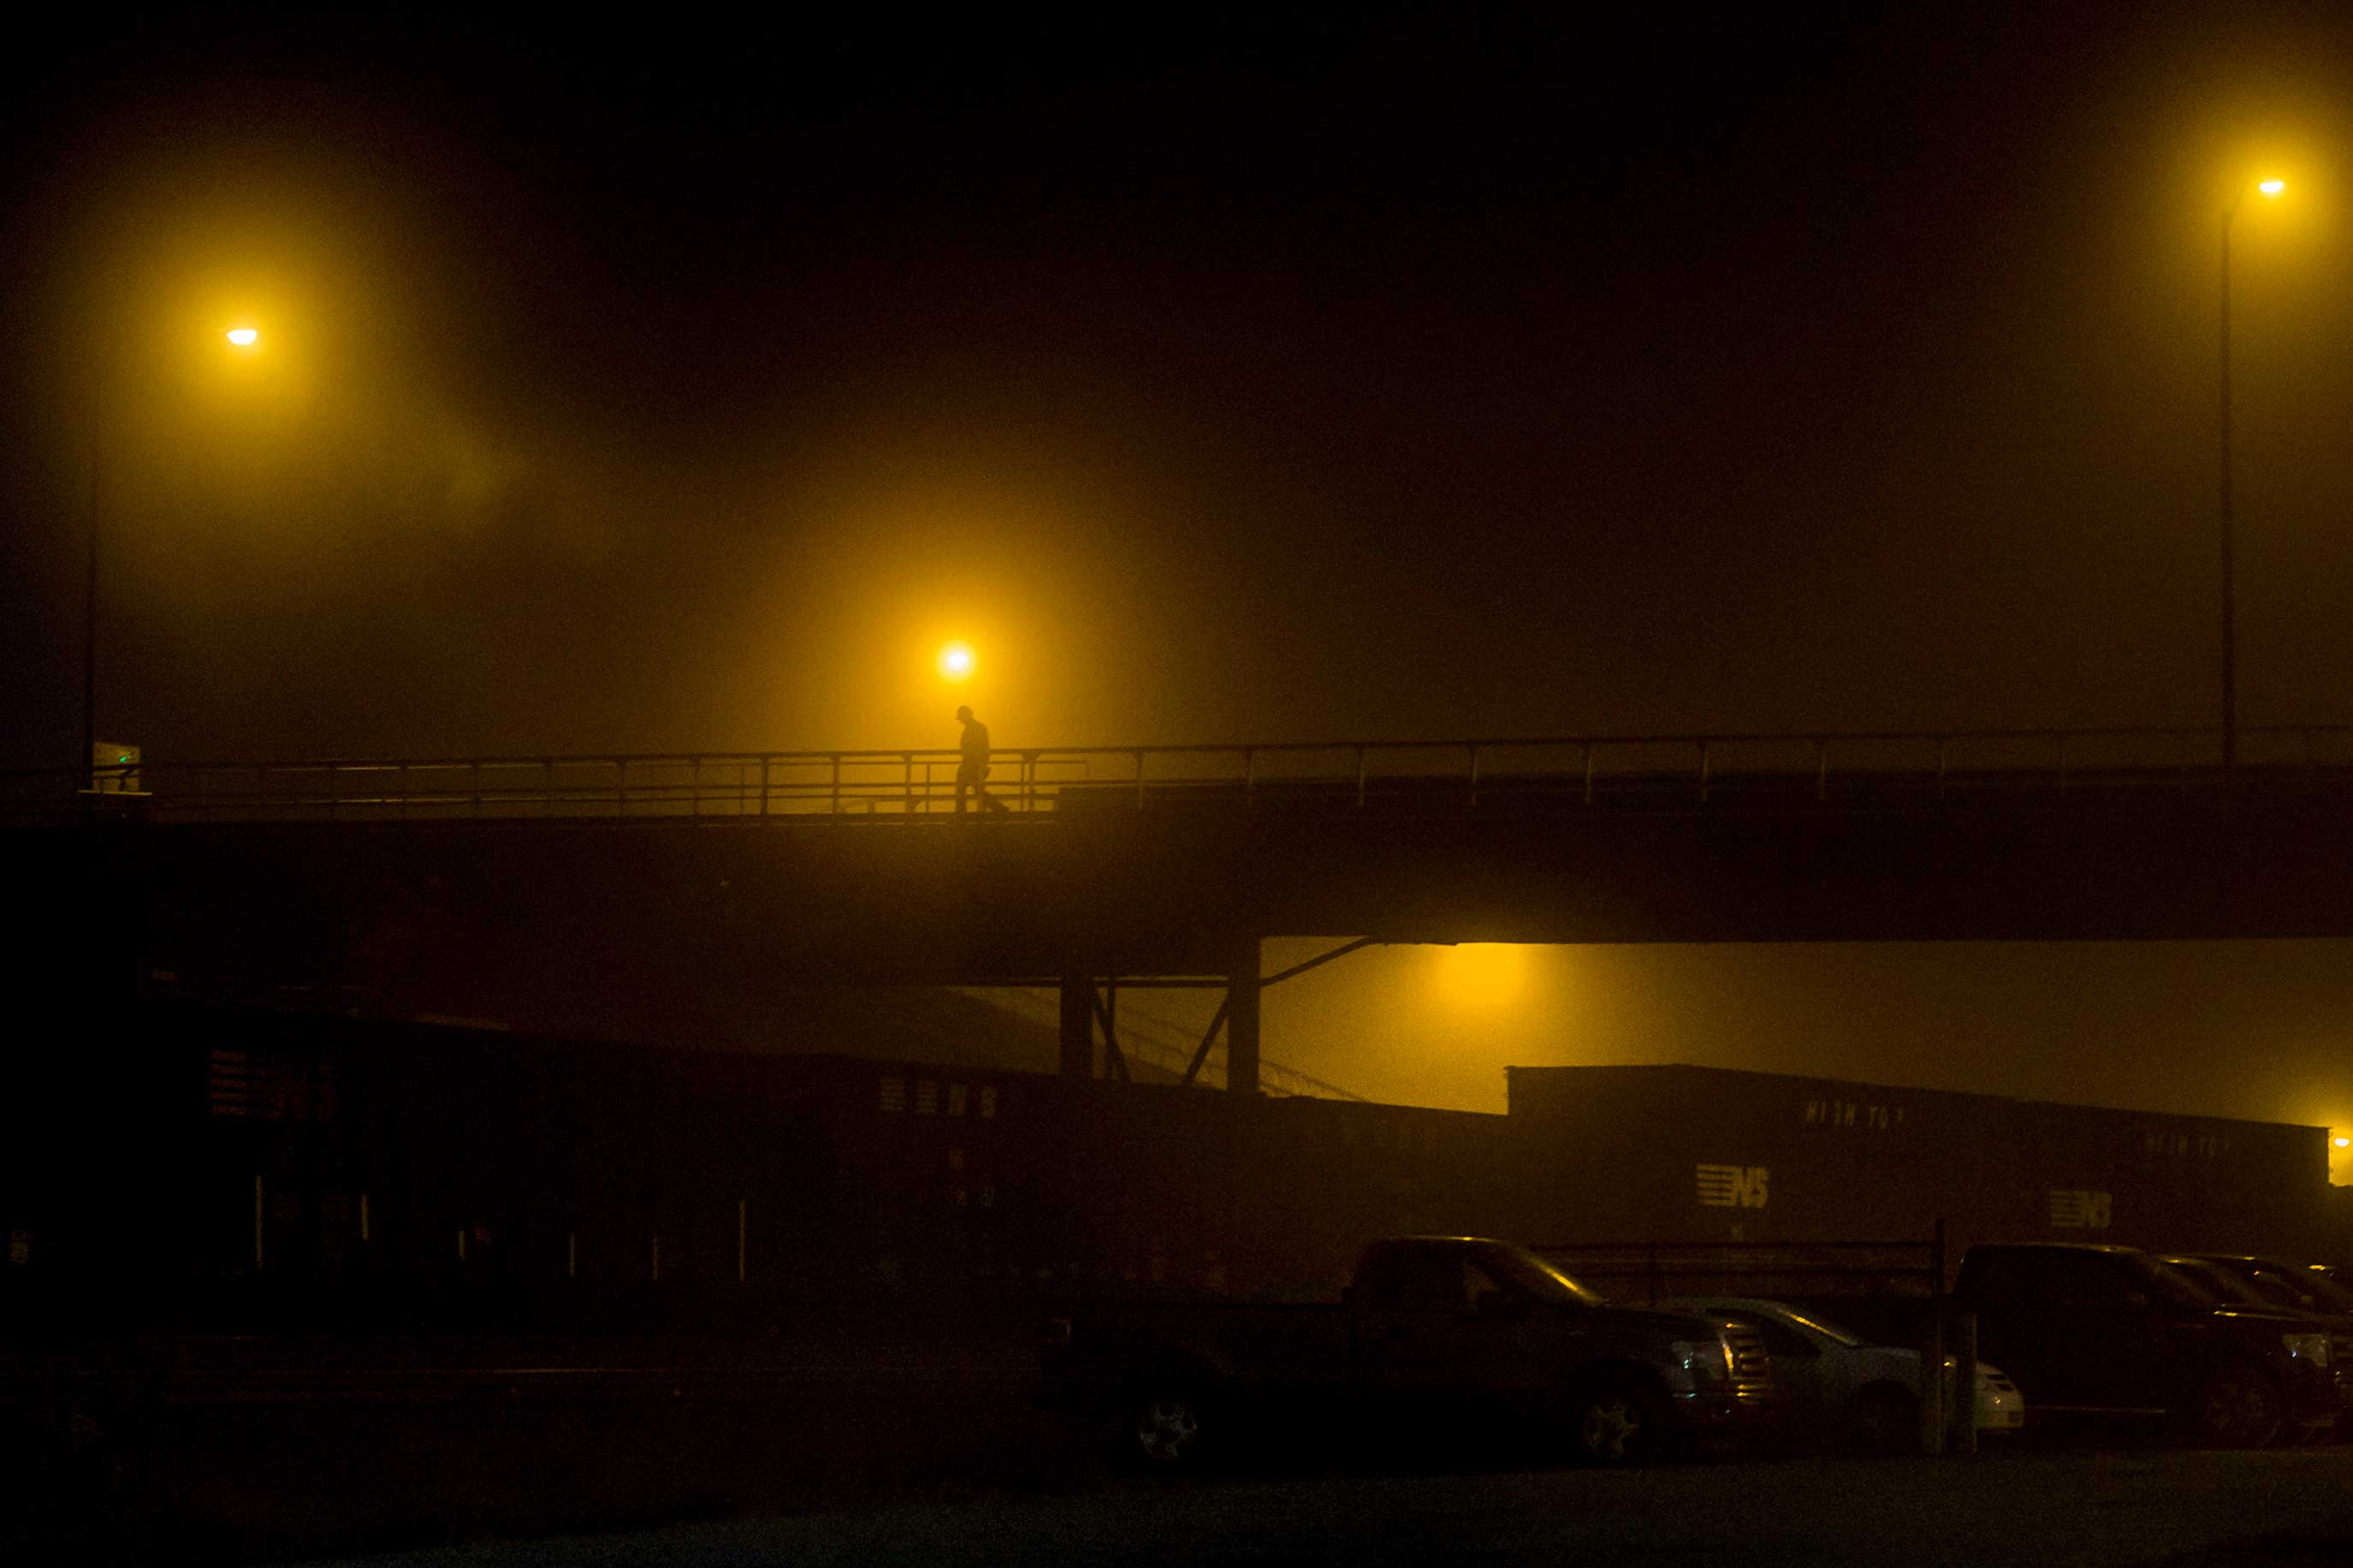 A worker makes his way to the Clairton Coke Plant in Clairton, PA. during early morning shift change.